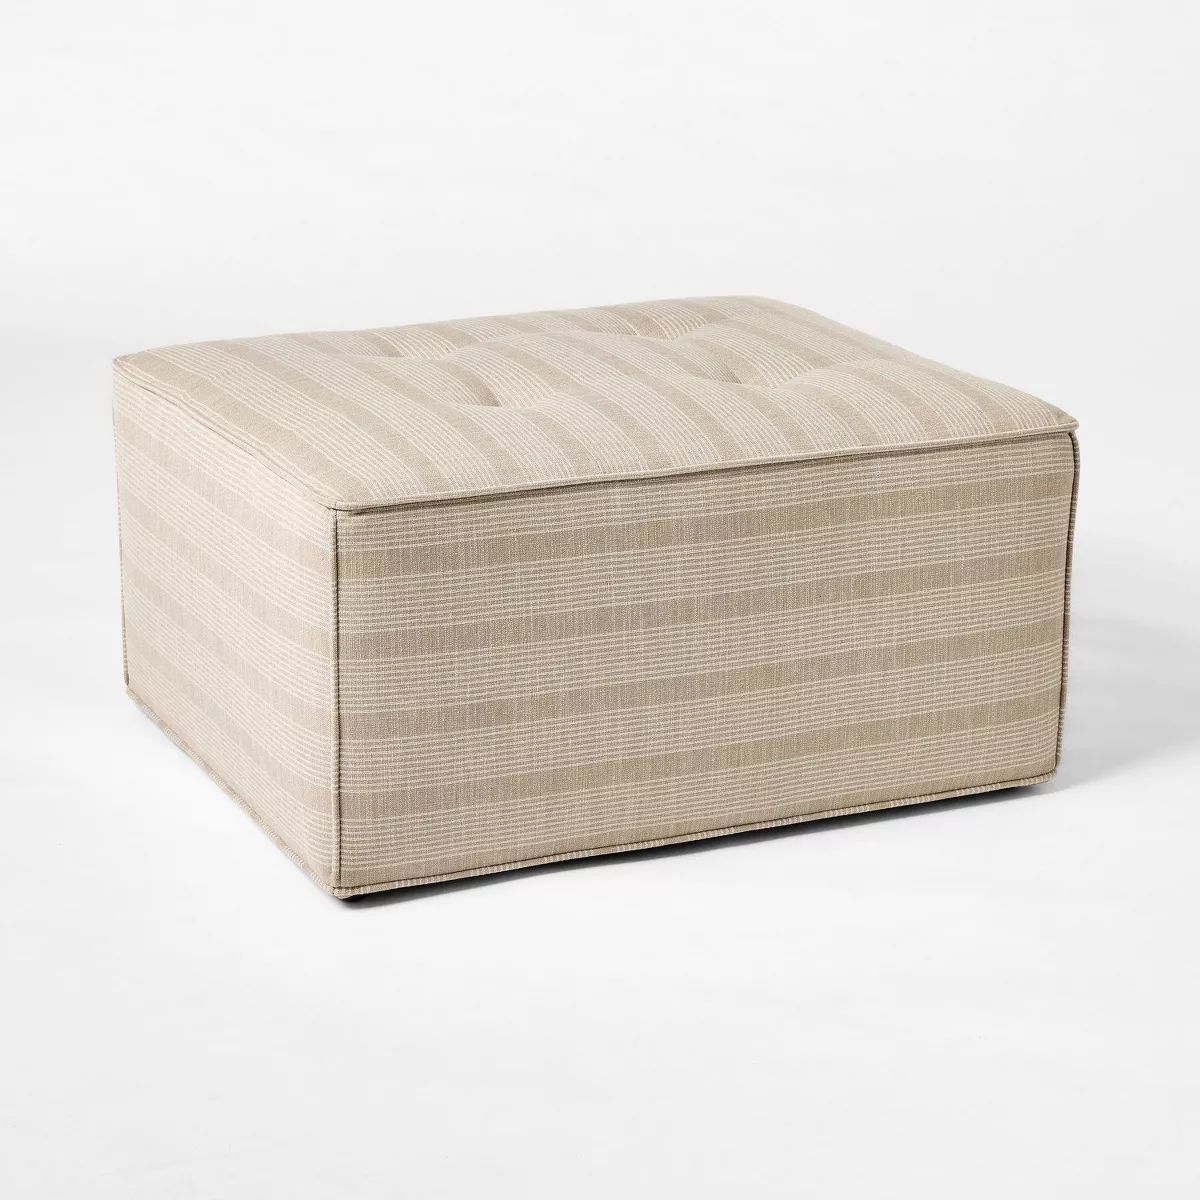 Tufted Cocktail Ottoman Tan - Threshold™ with Studio McGee | Target